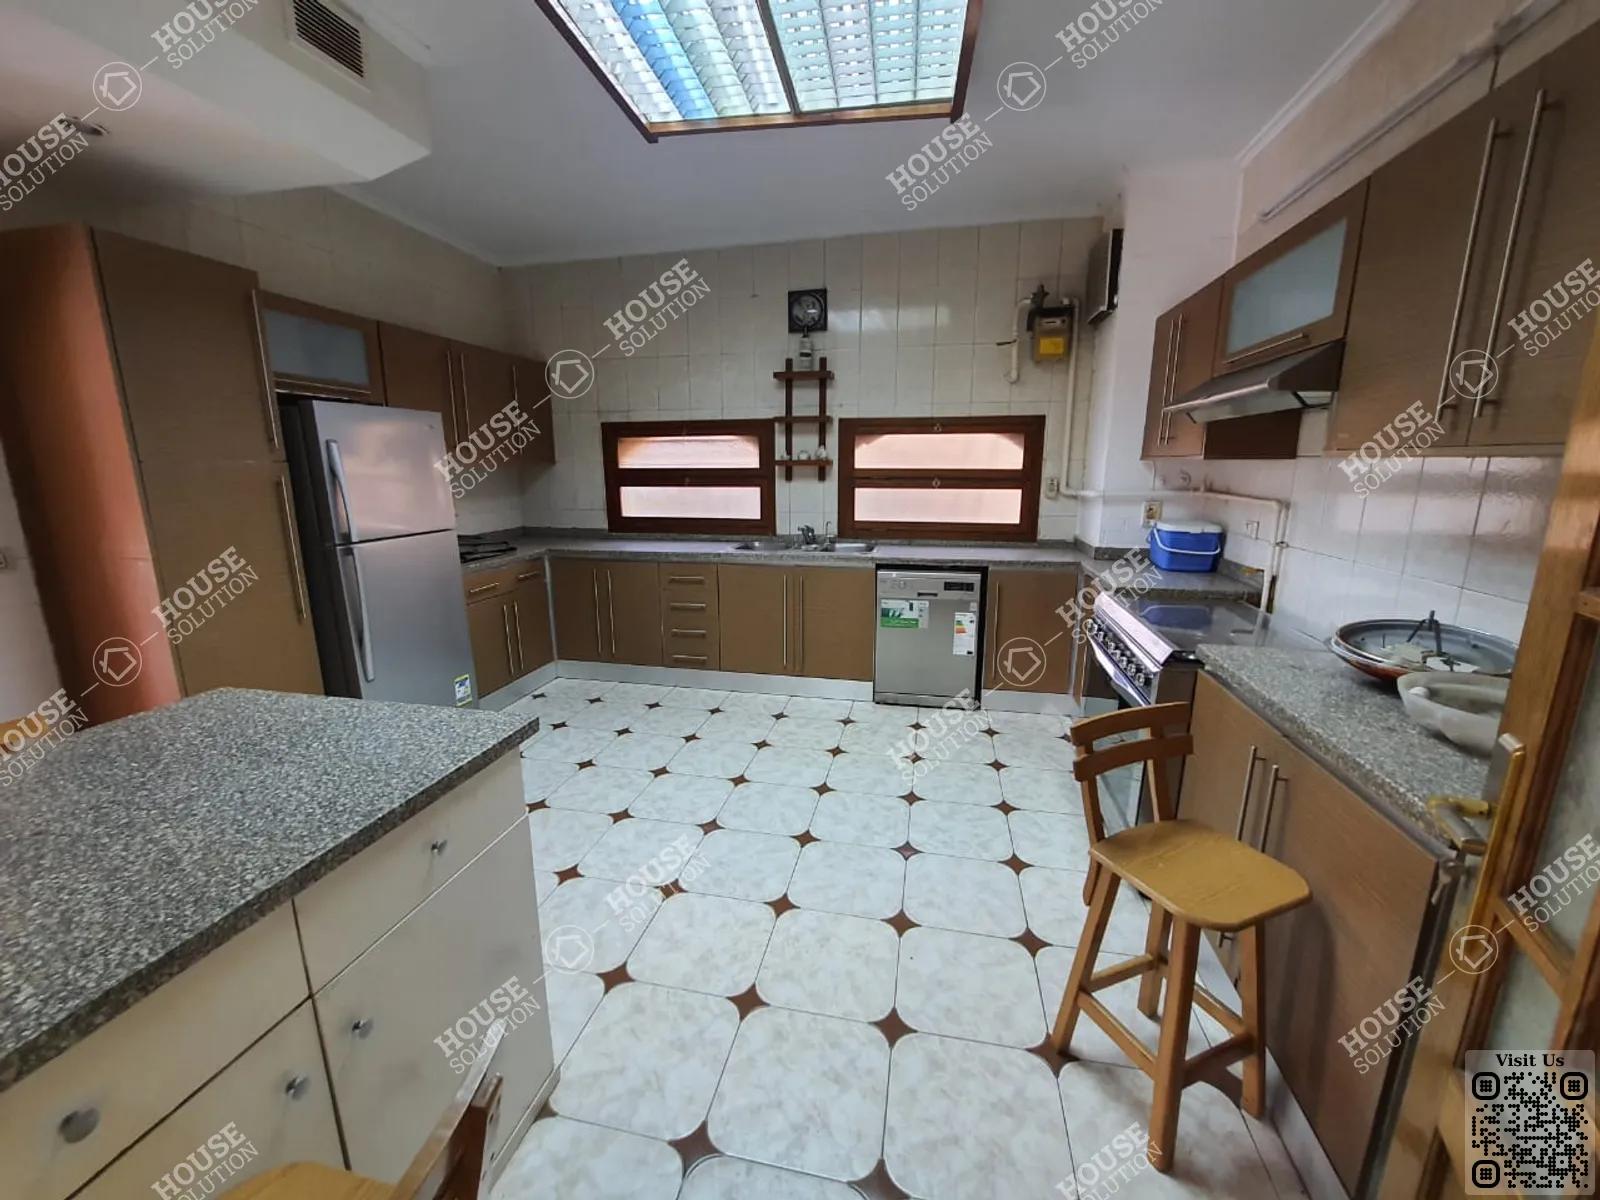 KITCHEN  @ Apartments For Rent In Maadi Maadi Degla Area: 400 m² consists of 4 Bedrooms 4 Bathrooms Furnished 5 stars #5154-1